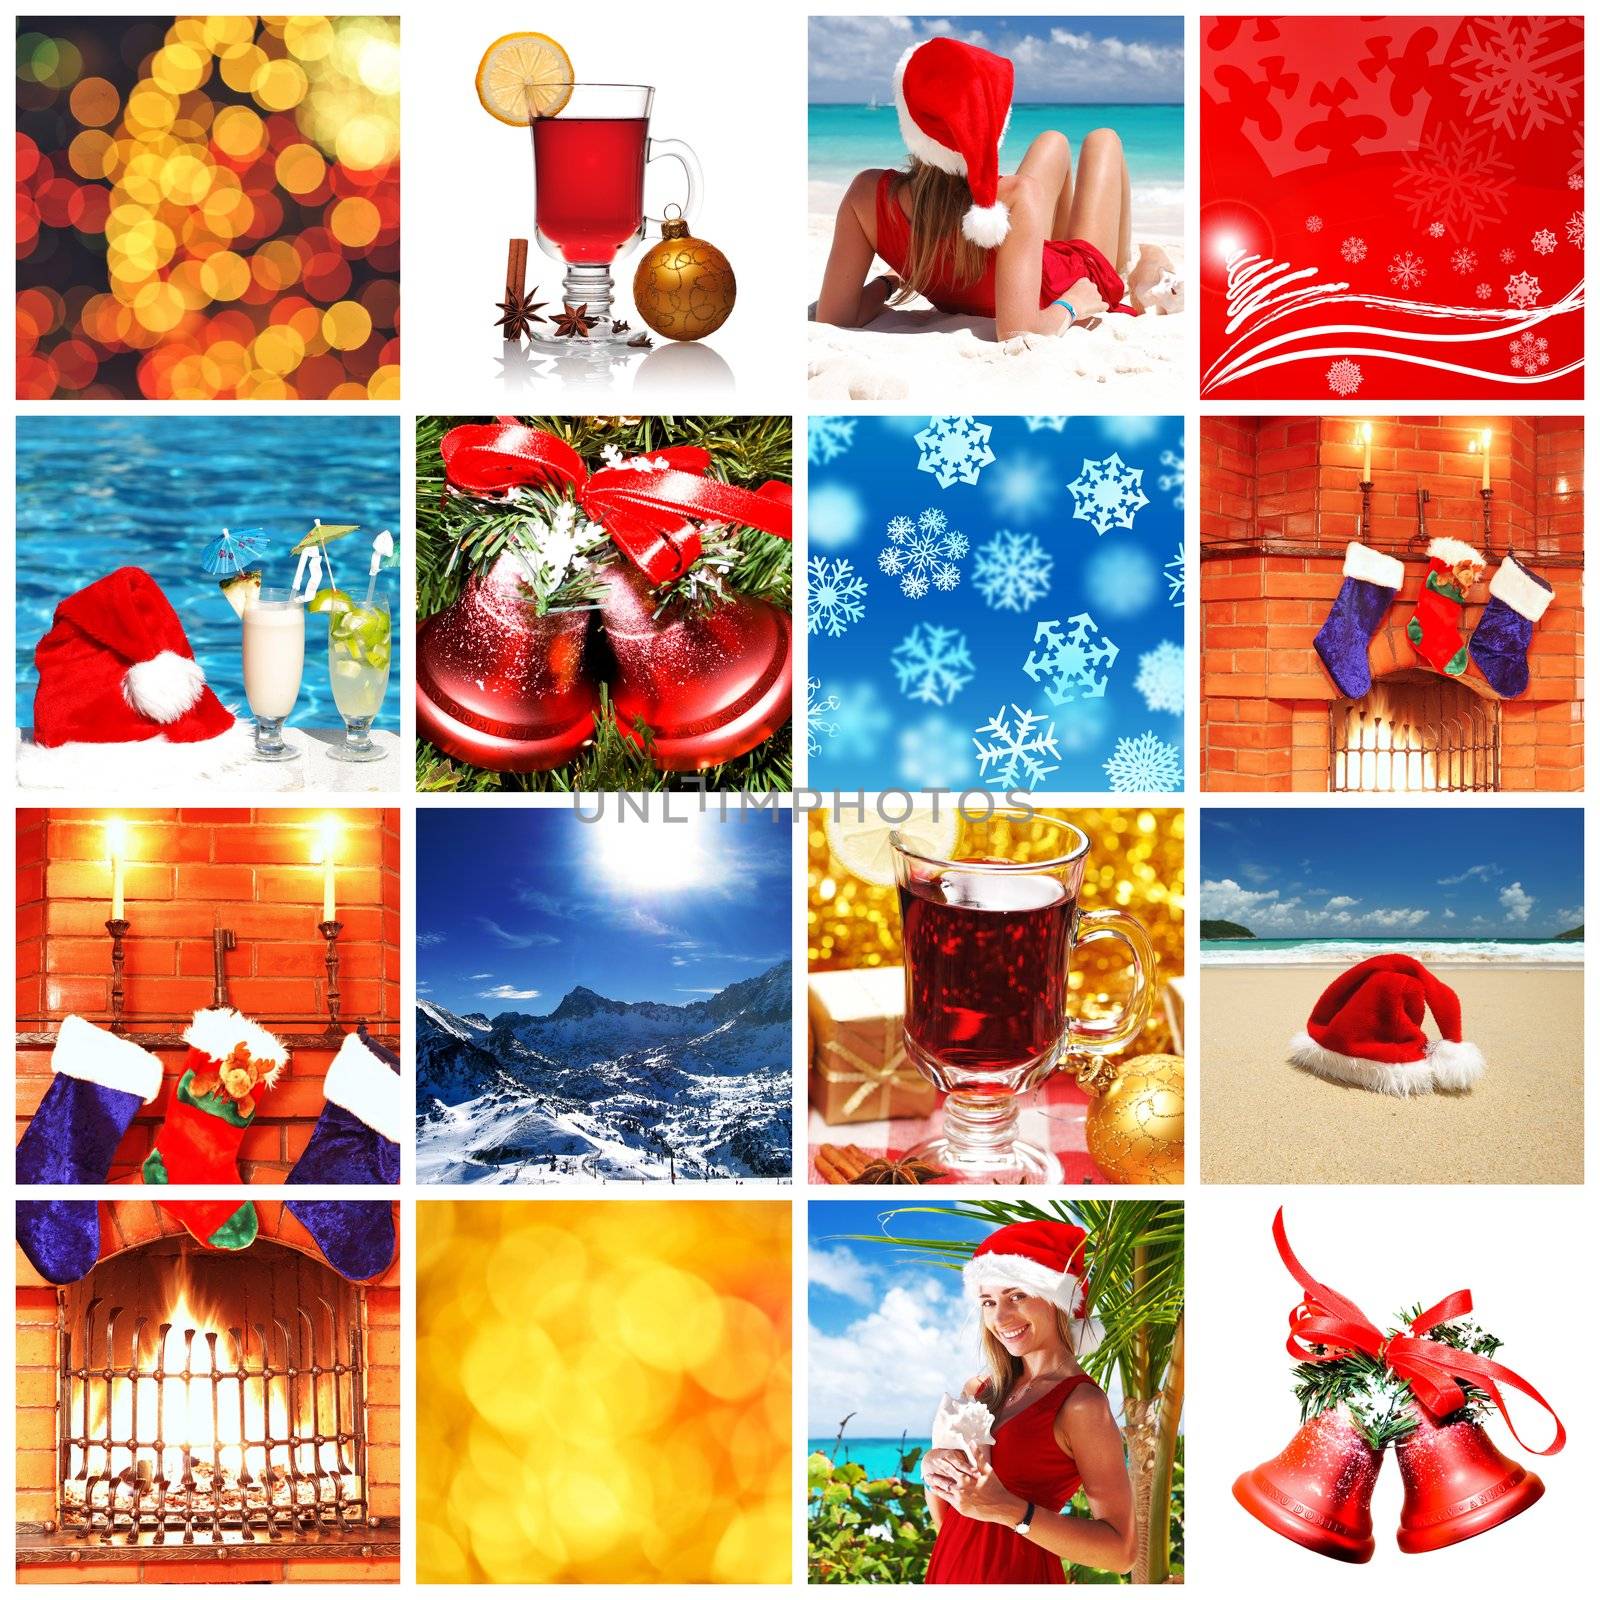 Collage made with christmas shots and illustrations